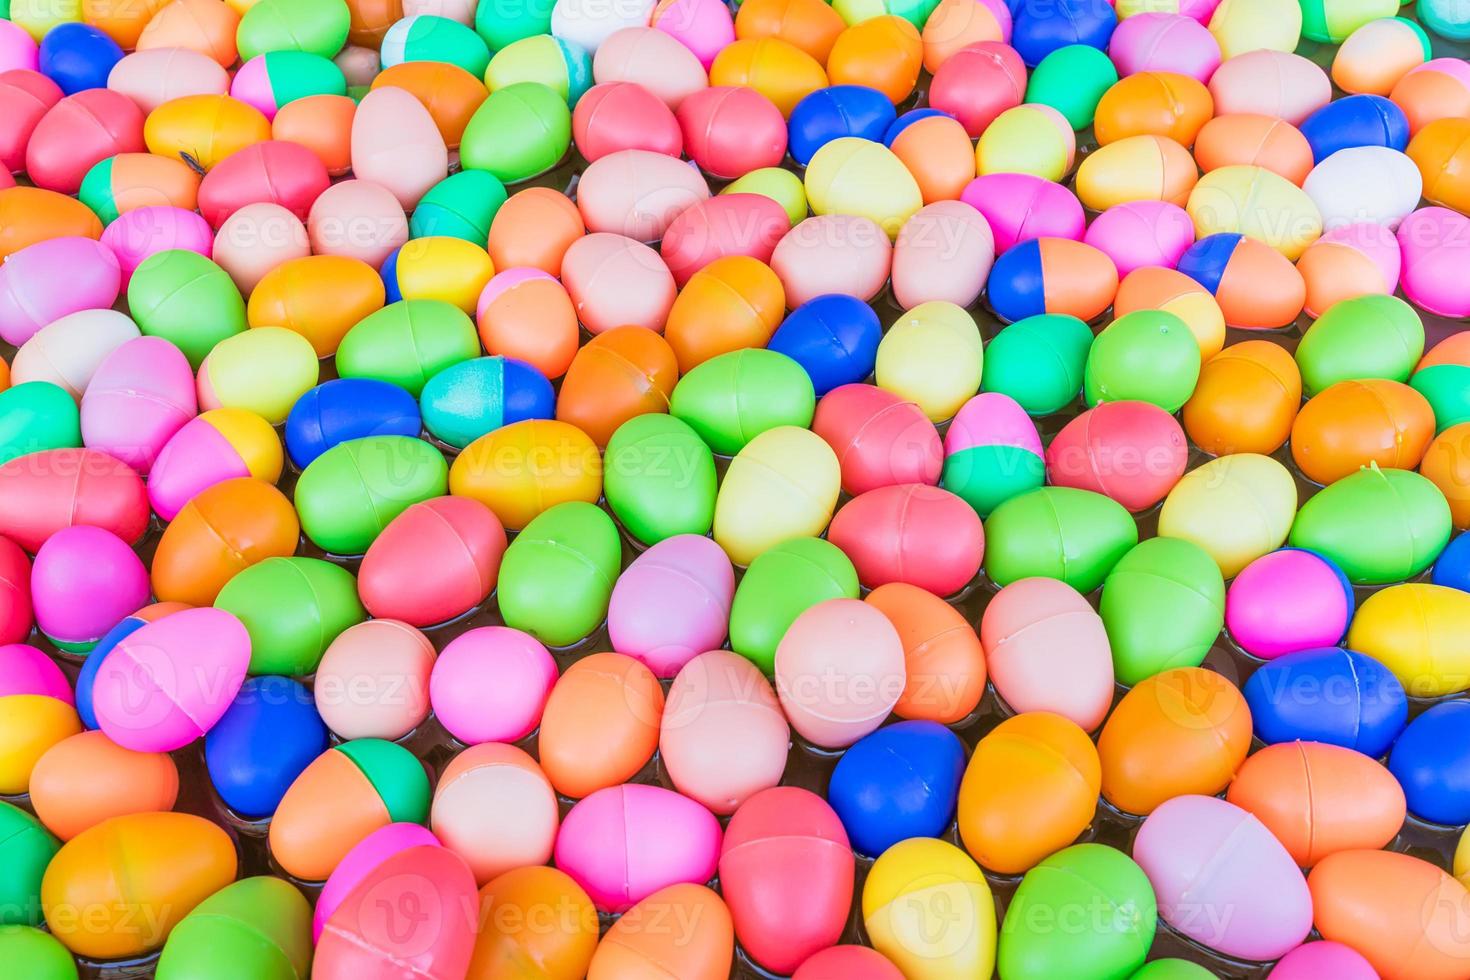 The Colorful easter eggs photo